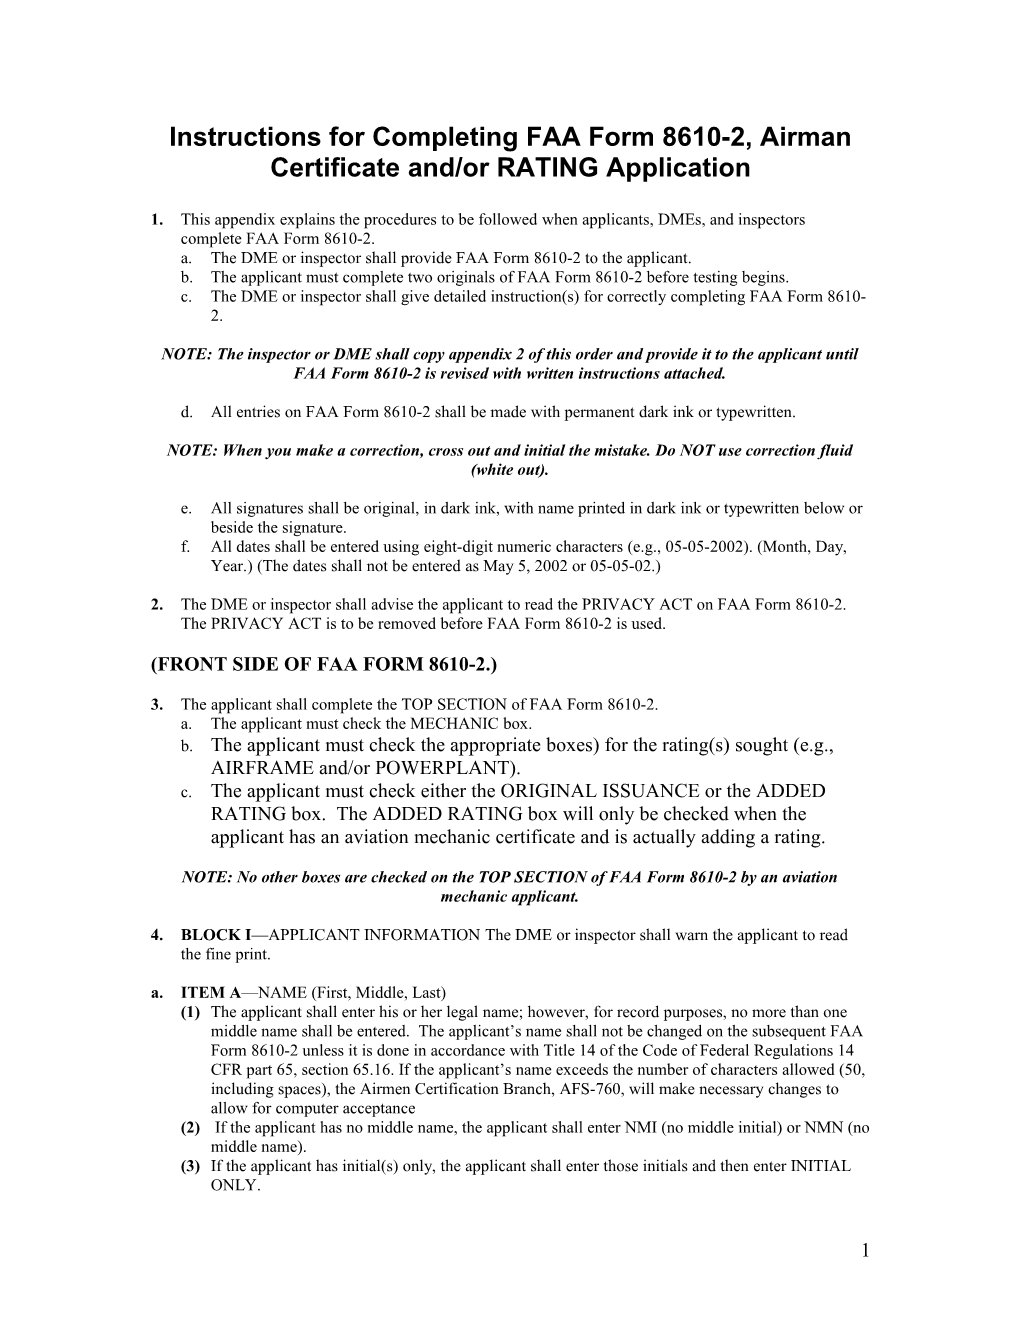 Instructions for Completing FAA Form 8610-2, Airman Certificate And/Or RATING Application